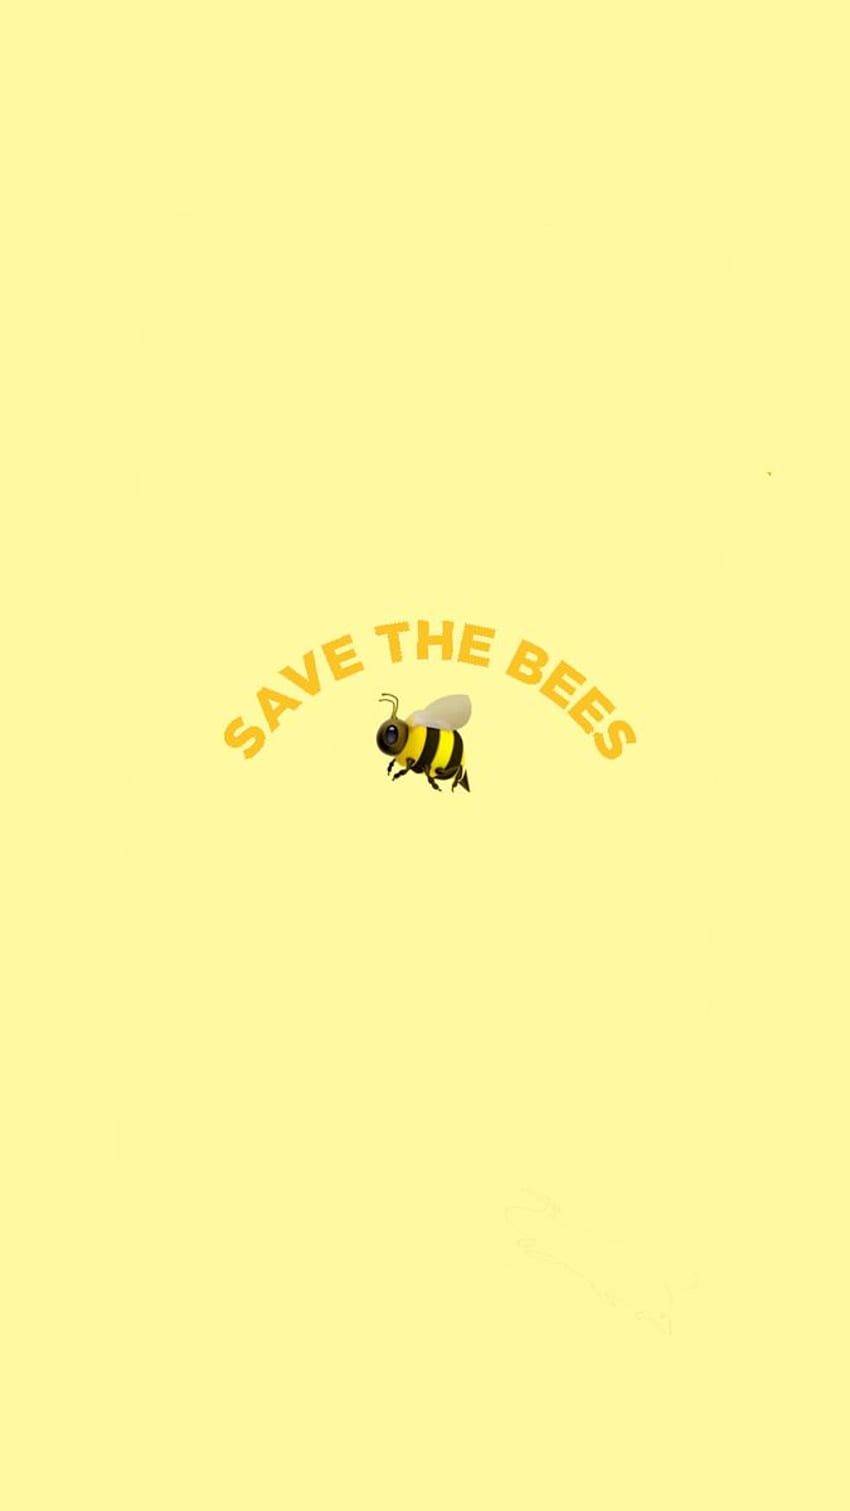 Save the bees - Bee